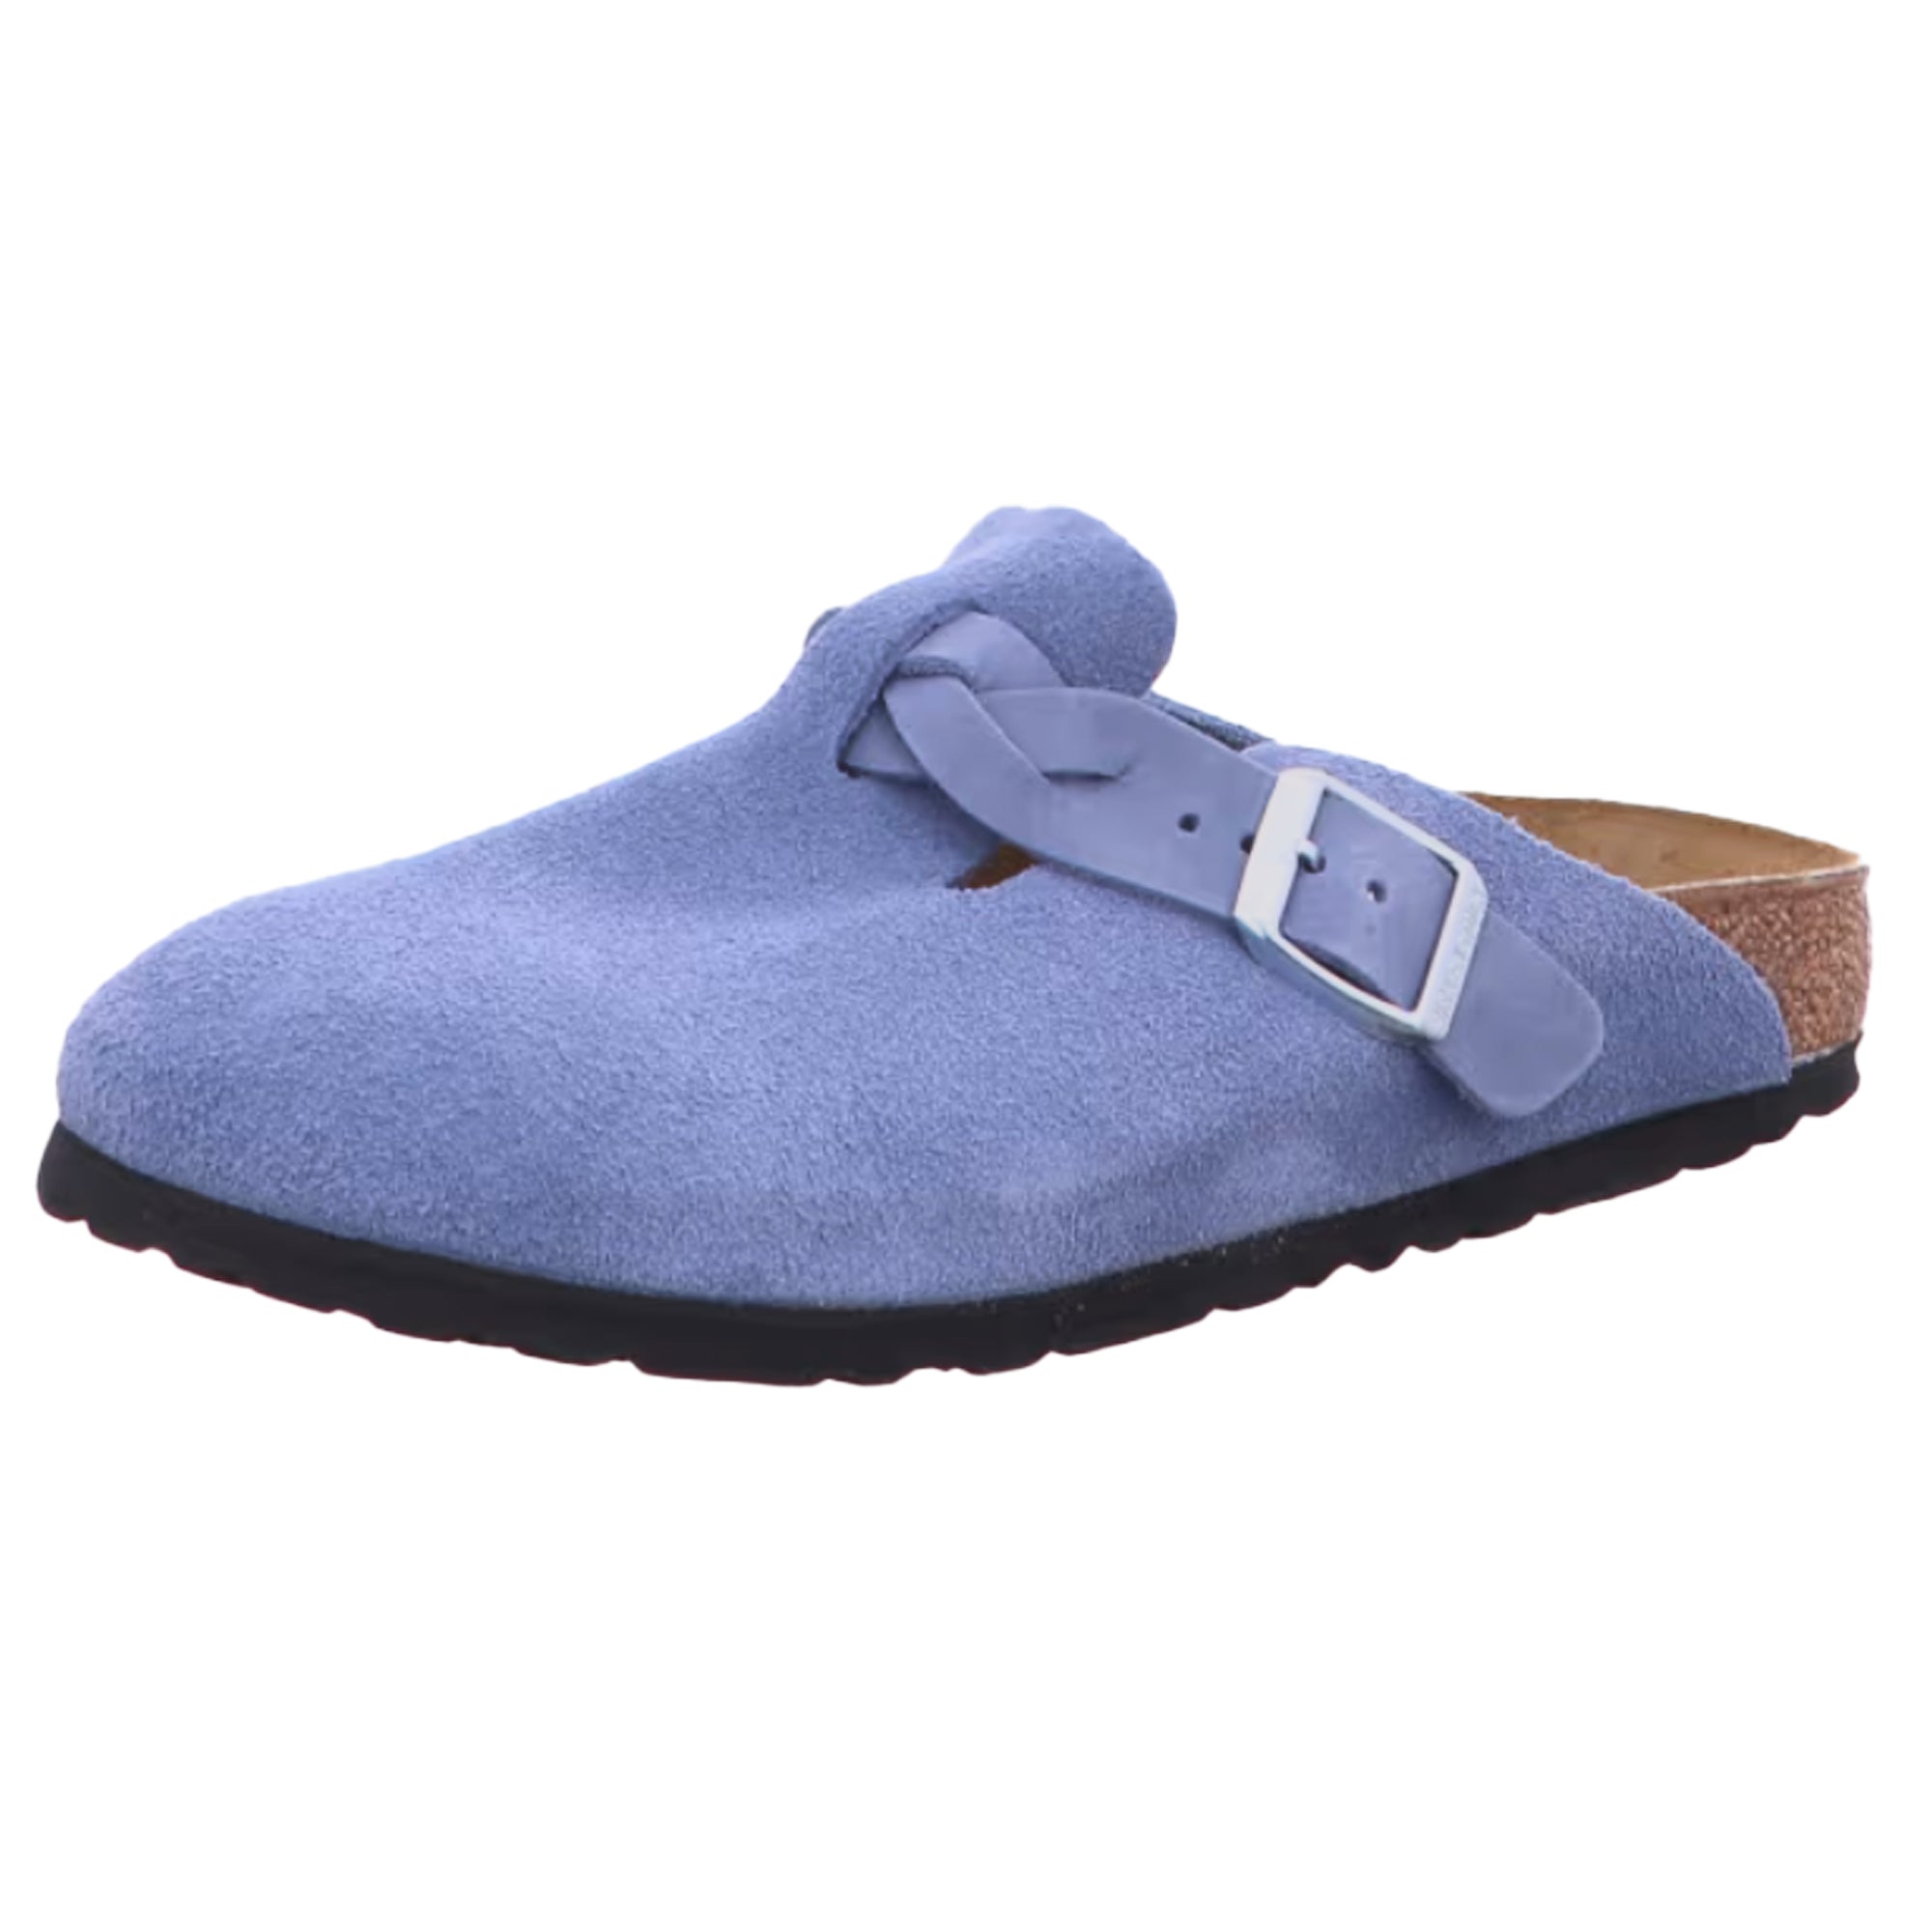 Birkenstock Boston Braided Suede Leather Sandals Clogs Mules Women Slippers Shoes